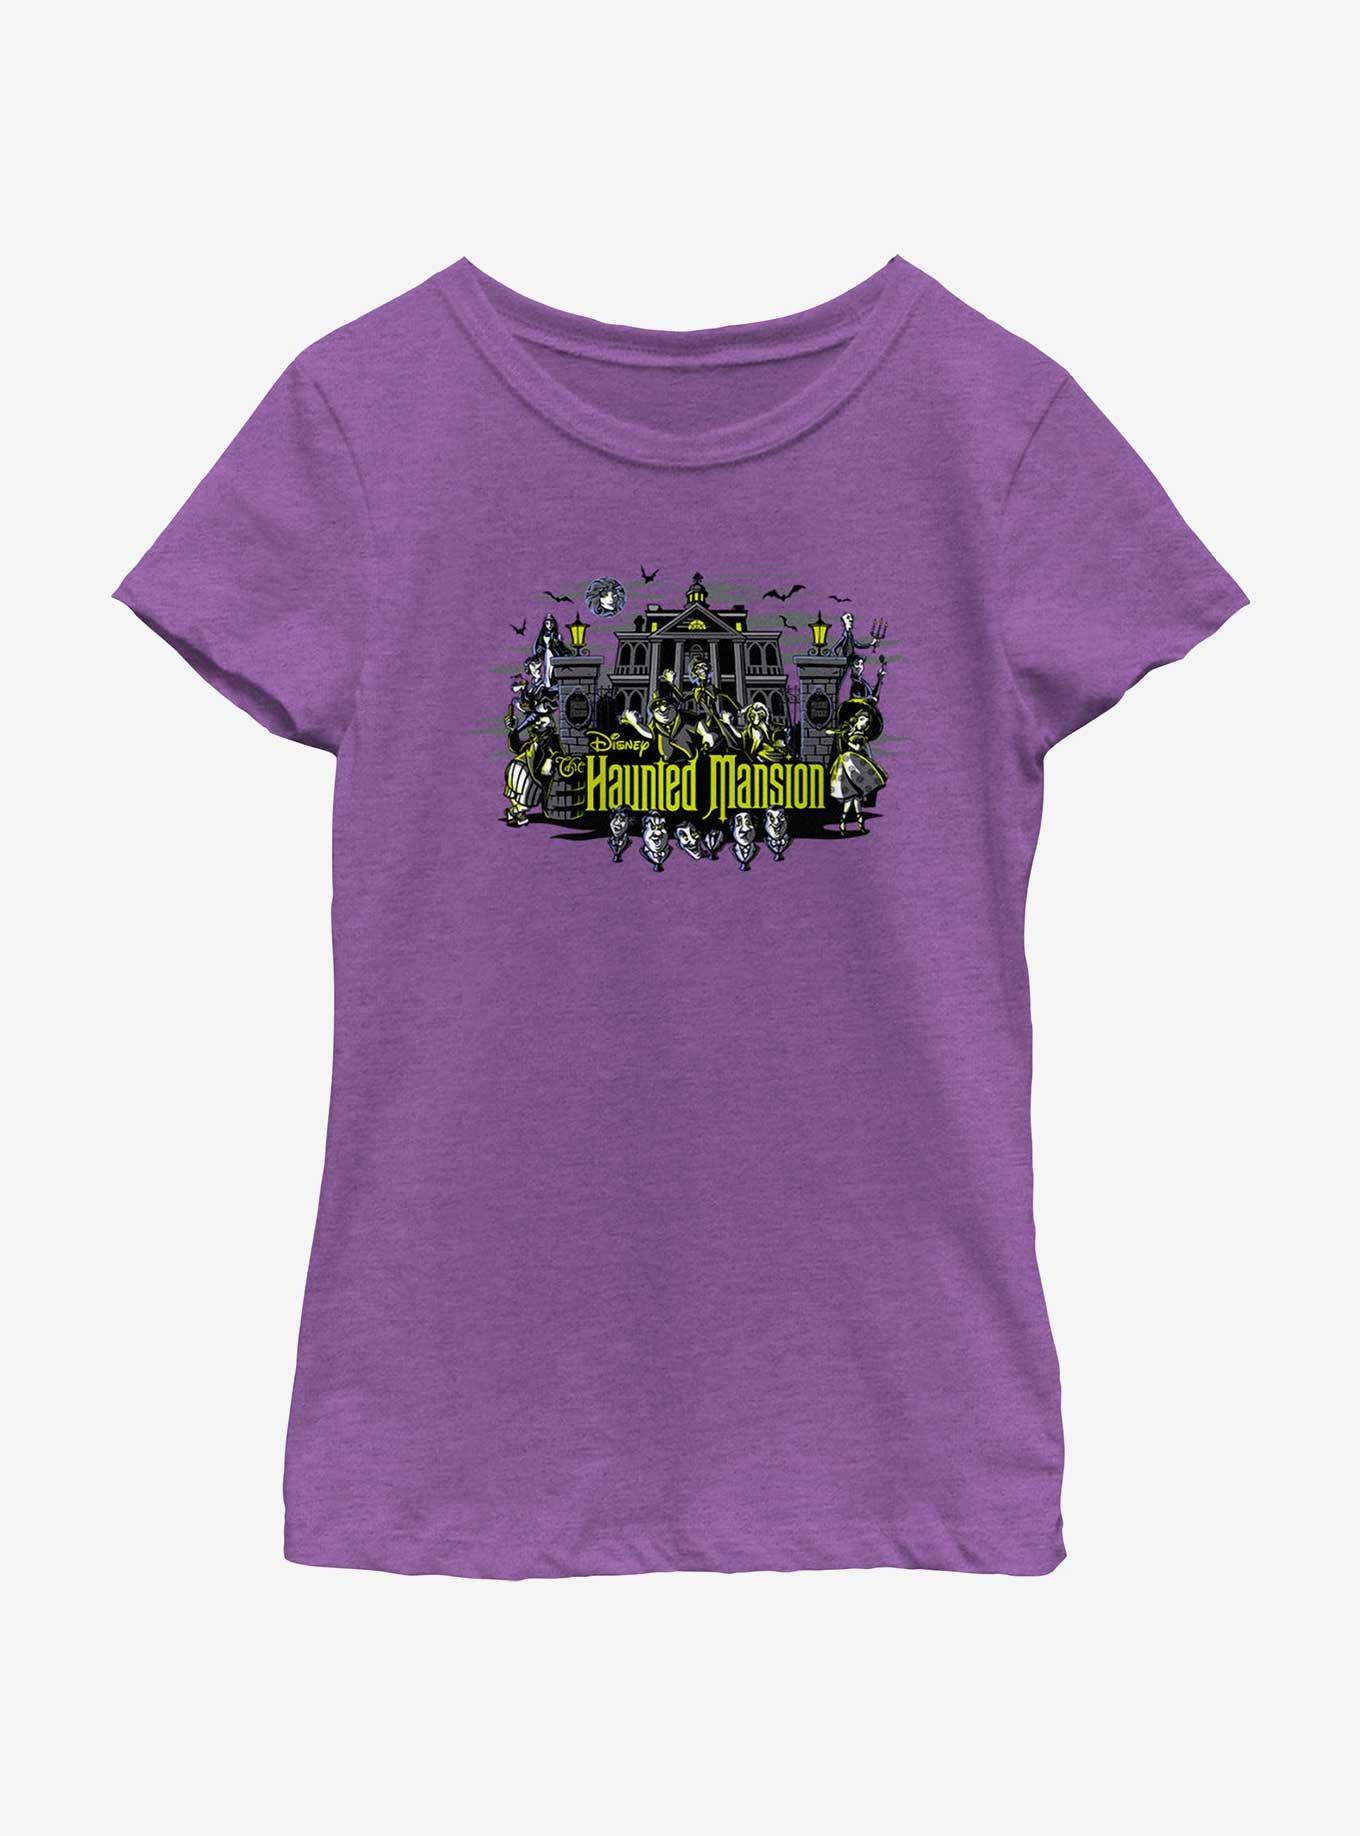 Disney Haunted Mansion Mansion Residents Youth Girls T-Shirt, PURPLE BERRY, hi-res